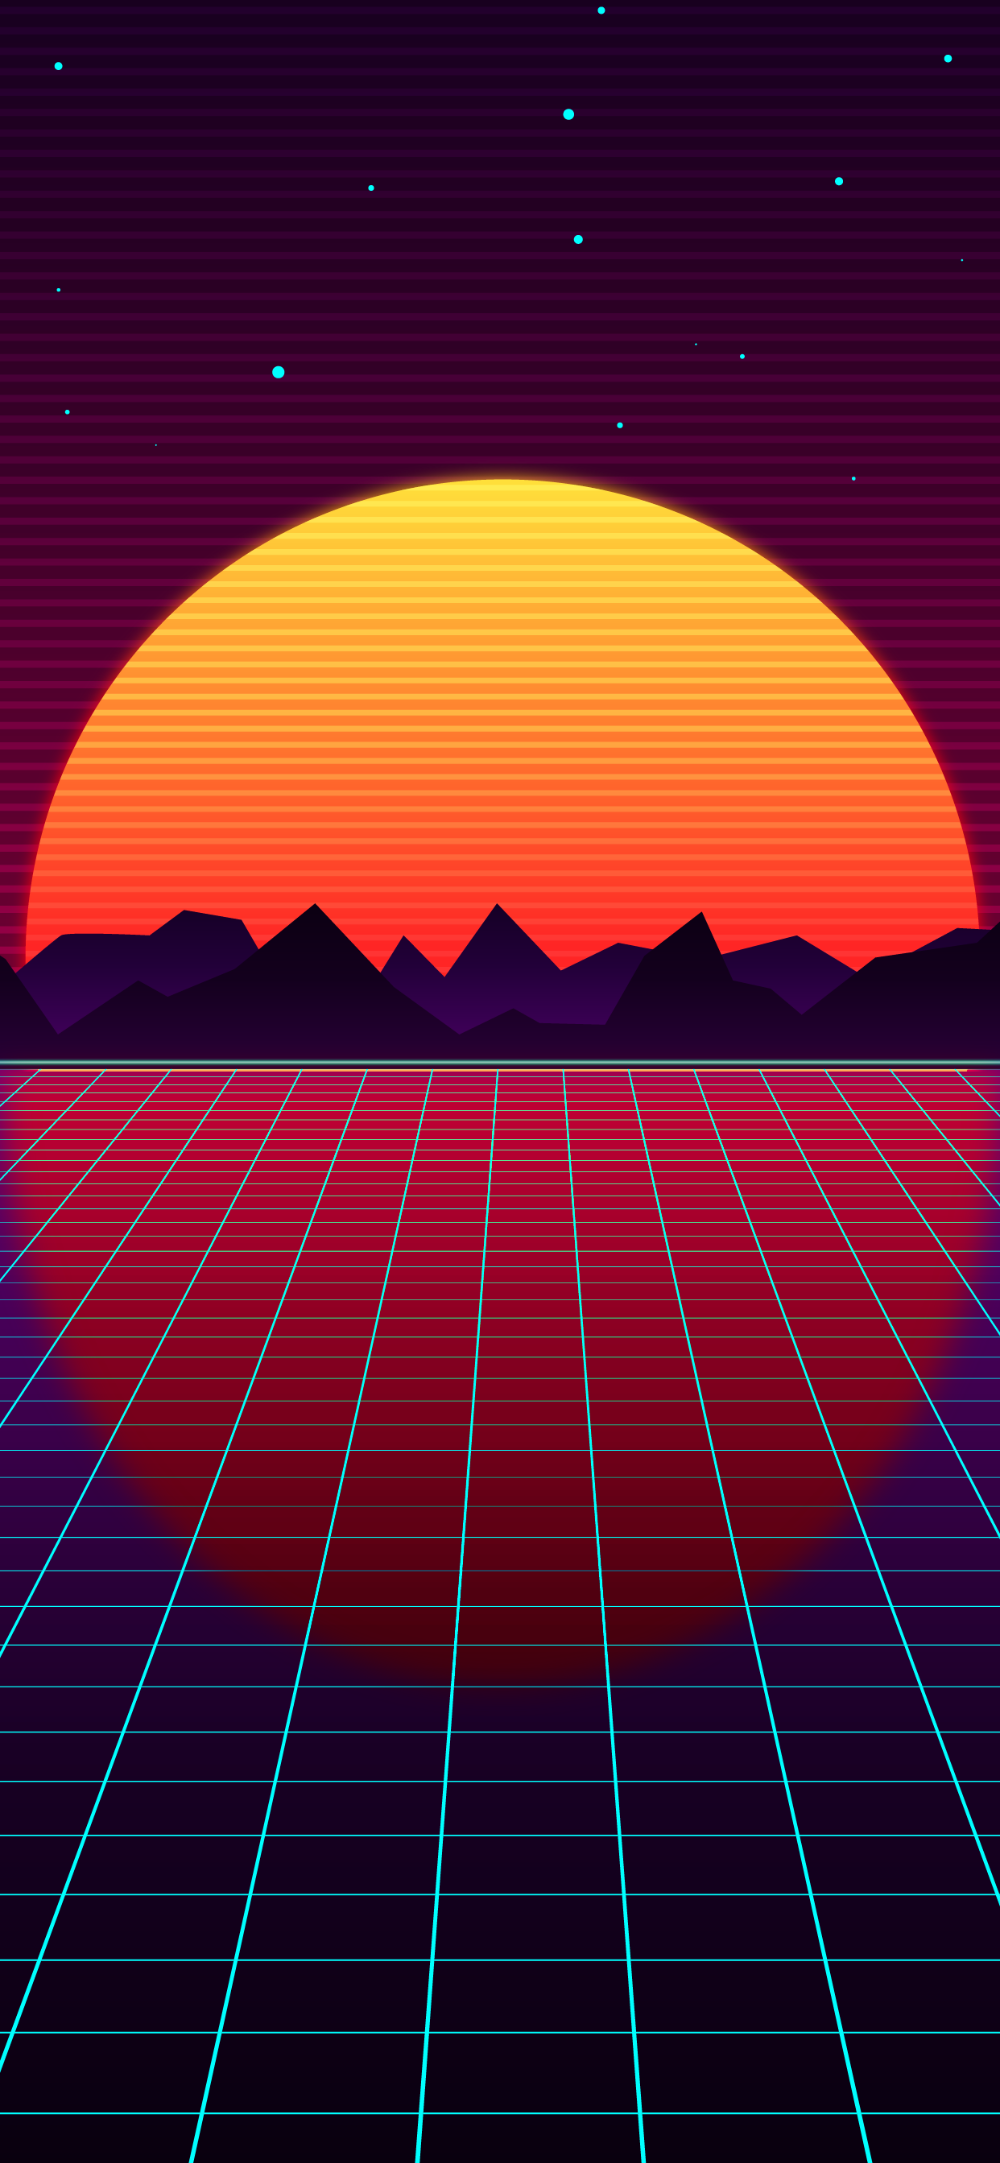 Retro Style Outrun Wallpaper For Phone In HD Heroscreen